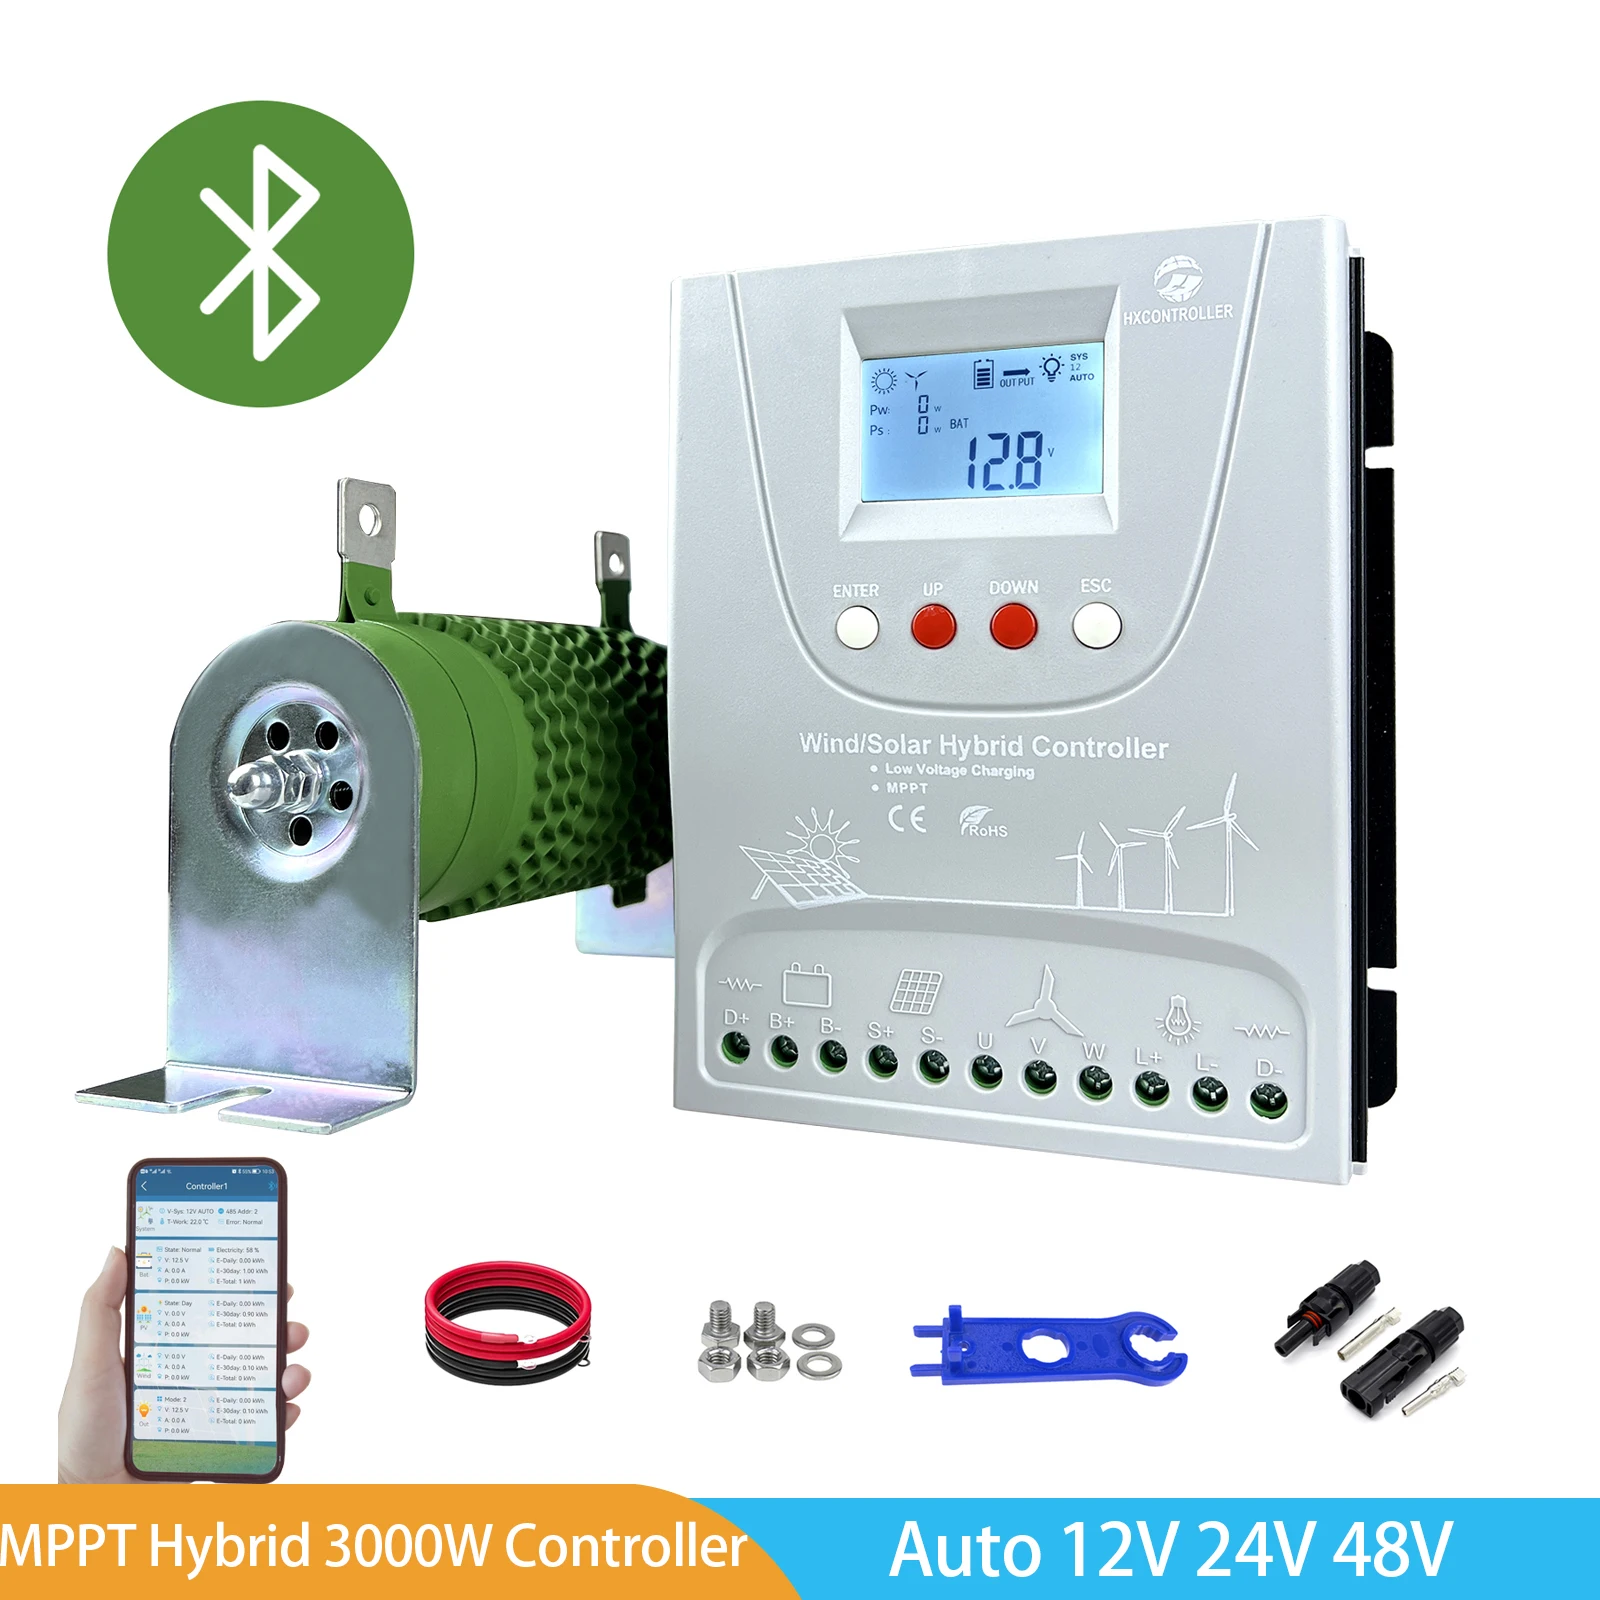 

12V 24V 48V 3000W Hybrid Wind Solar Charge Controller With Bluetooth MPPT Wind Generator Solar System For Lifepo4 Battery